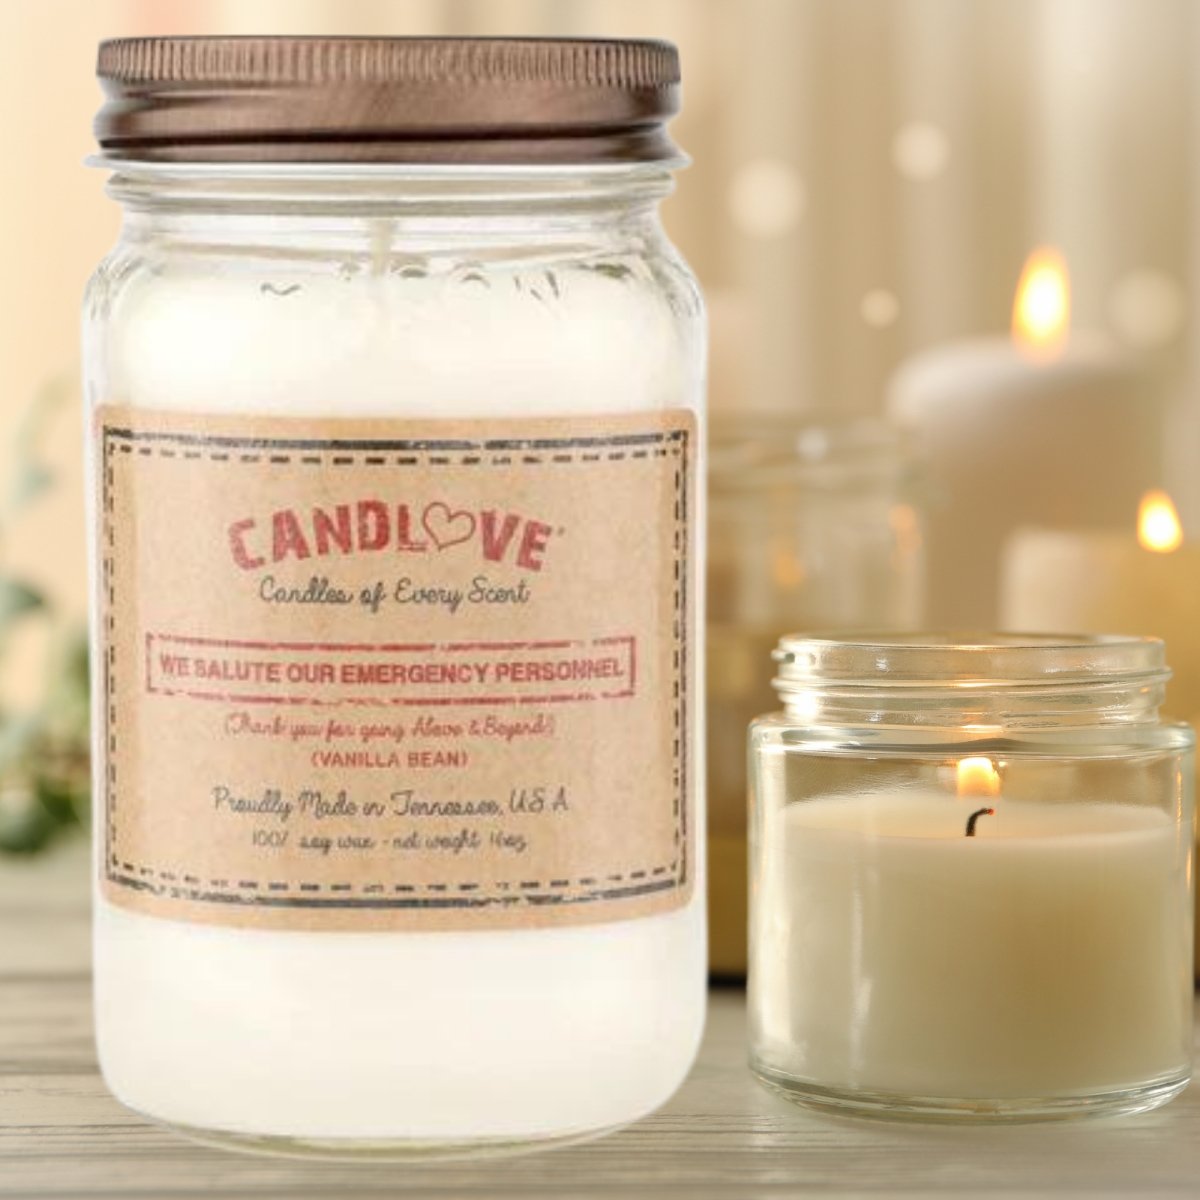 Picture of PPI SUPPLIES Vanilla-EM-C Candlove Vanilla We Salute Emergency Personell Scented Candle - Non-Toxic 100% Soy Candle - Handmade & Hand Poured Long Burning Candle - Highly Scented All Natural Clean Burning Candle (16 OZ Mason Jar) Made in The USA